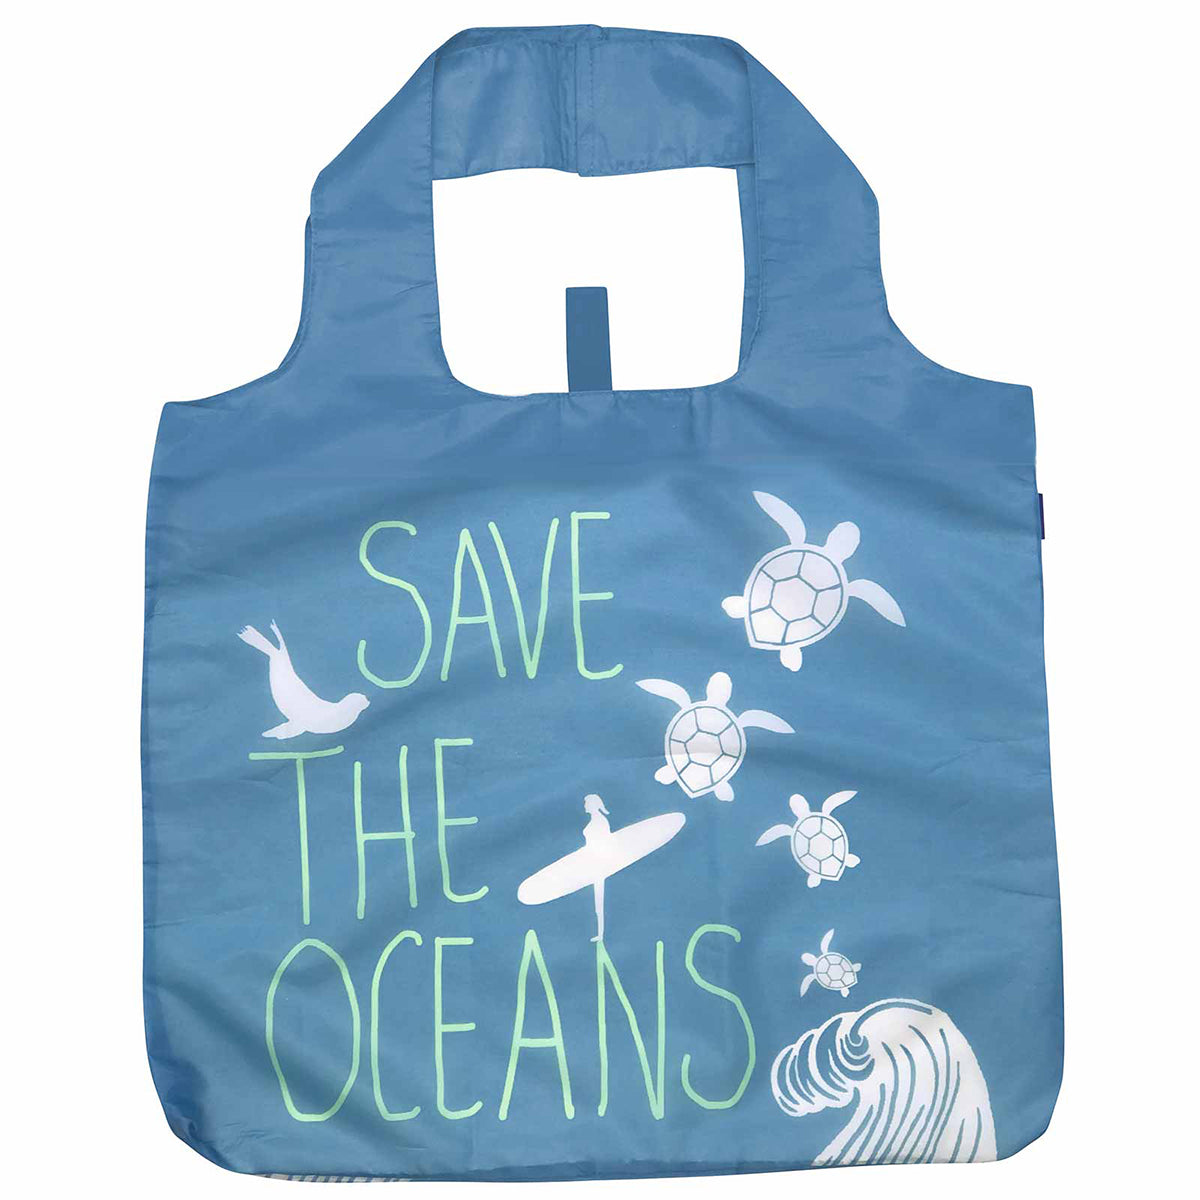 Rockflowerpaper&#39;s BLU BAG SAVE THE OCEANS, featuring illustrations of sea turtles, a dolphin, and a whale.